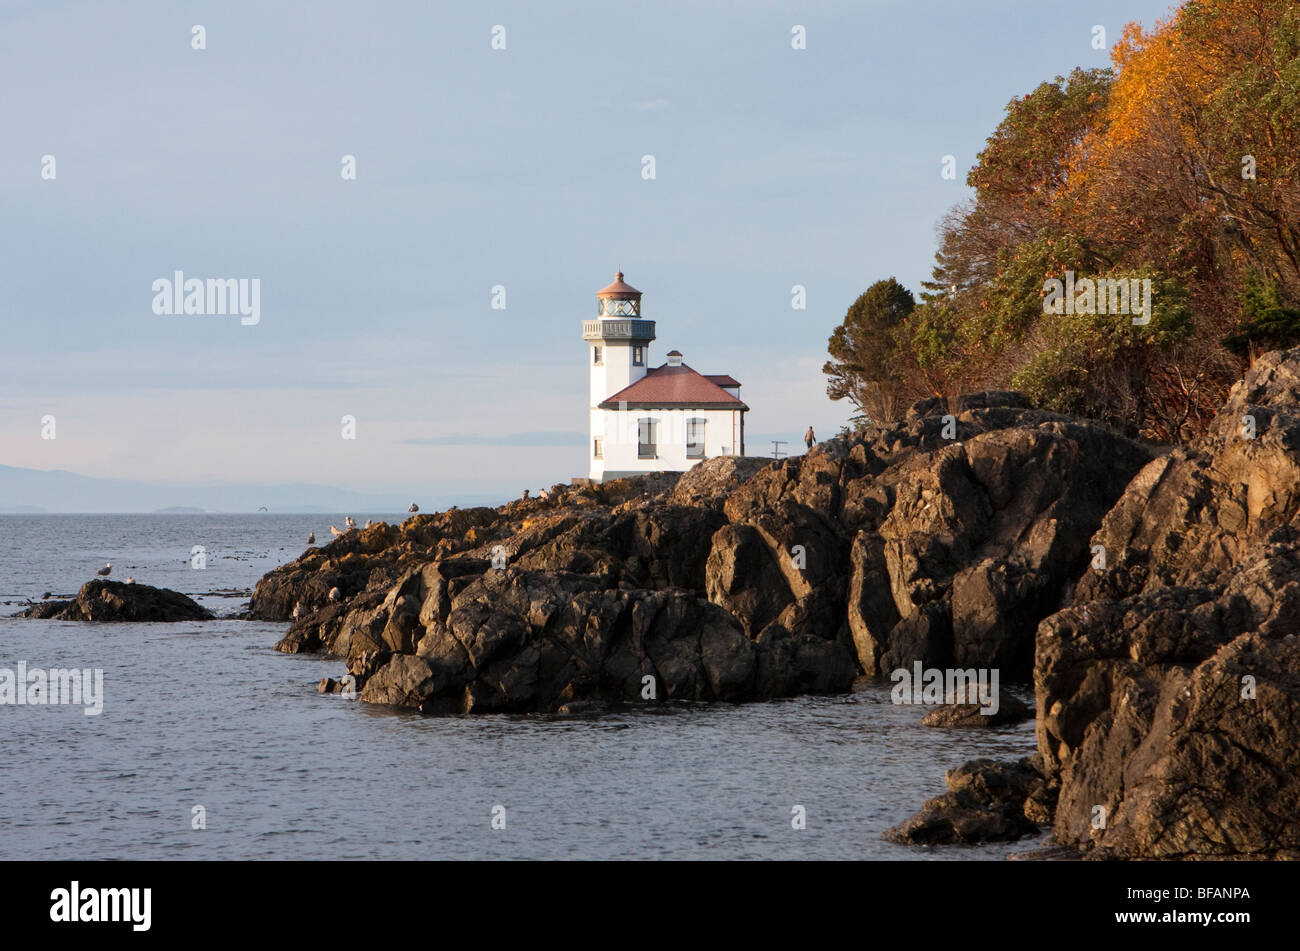 Lime Kiln lighthouse, surrounded by the rocky coastline, is illuminated by the warm light of a late autumn sunset. Stock Photo